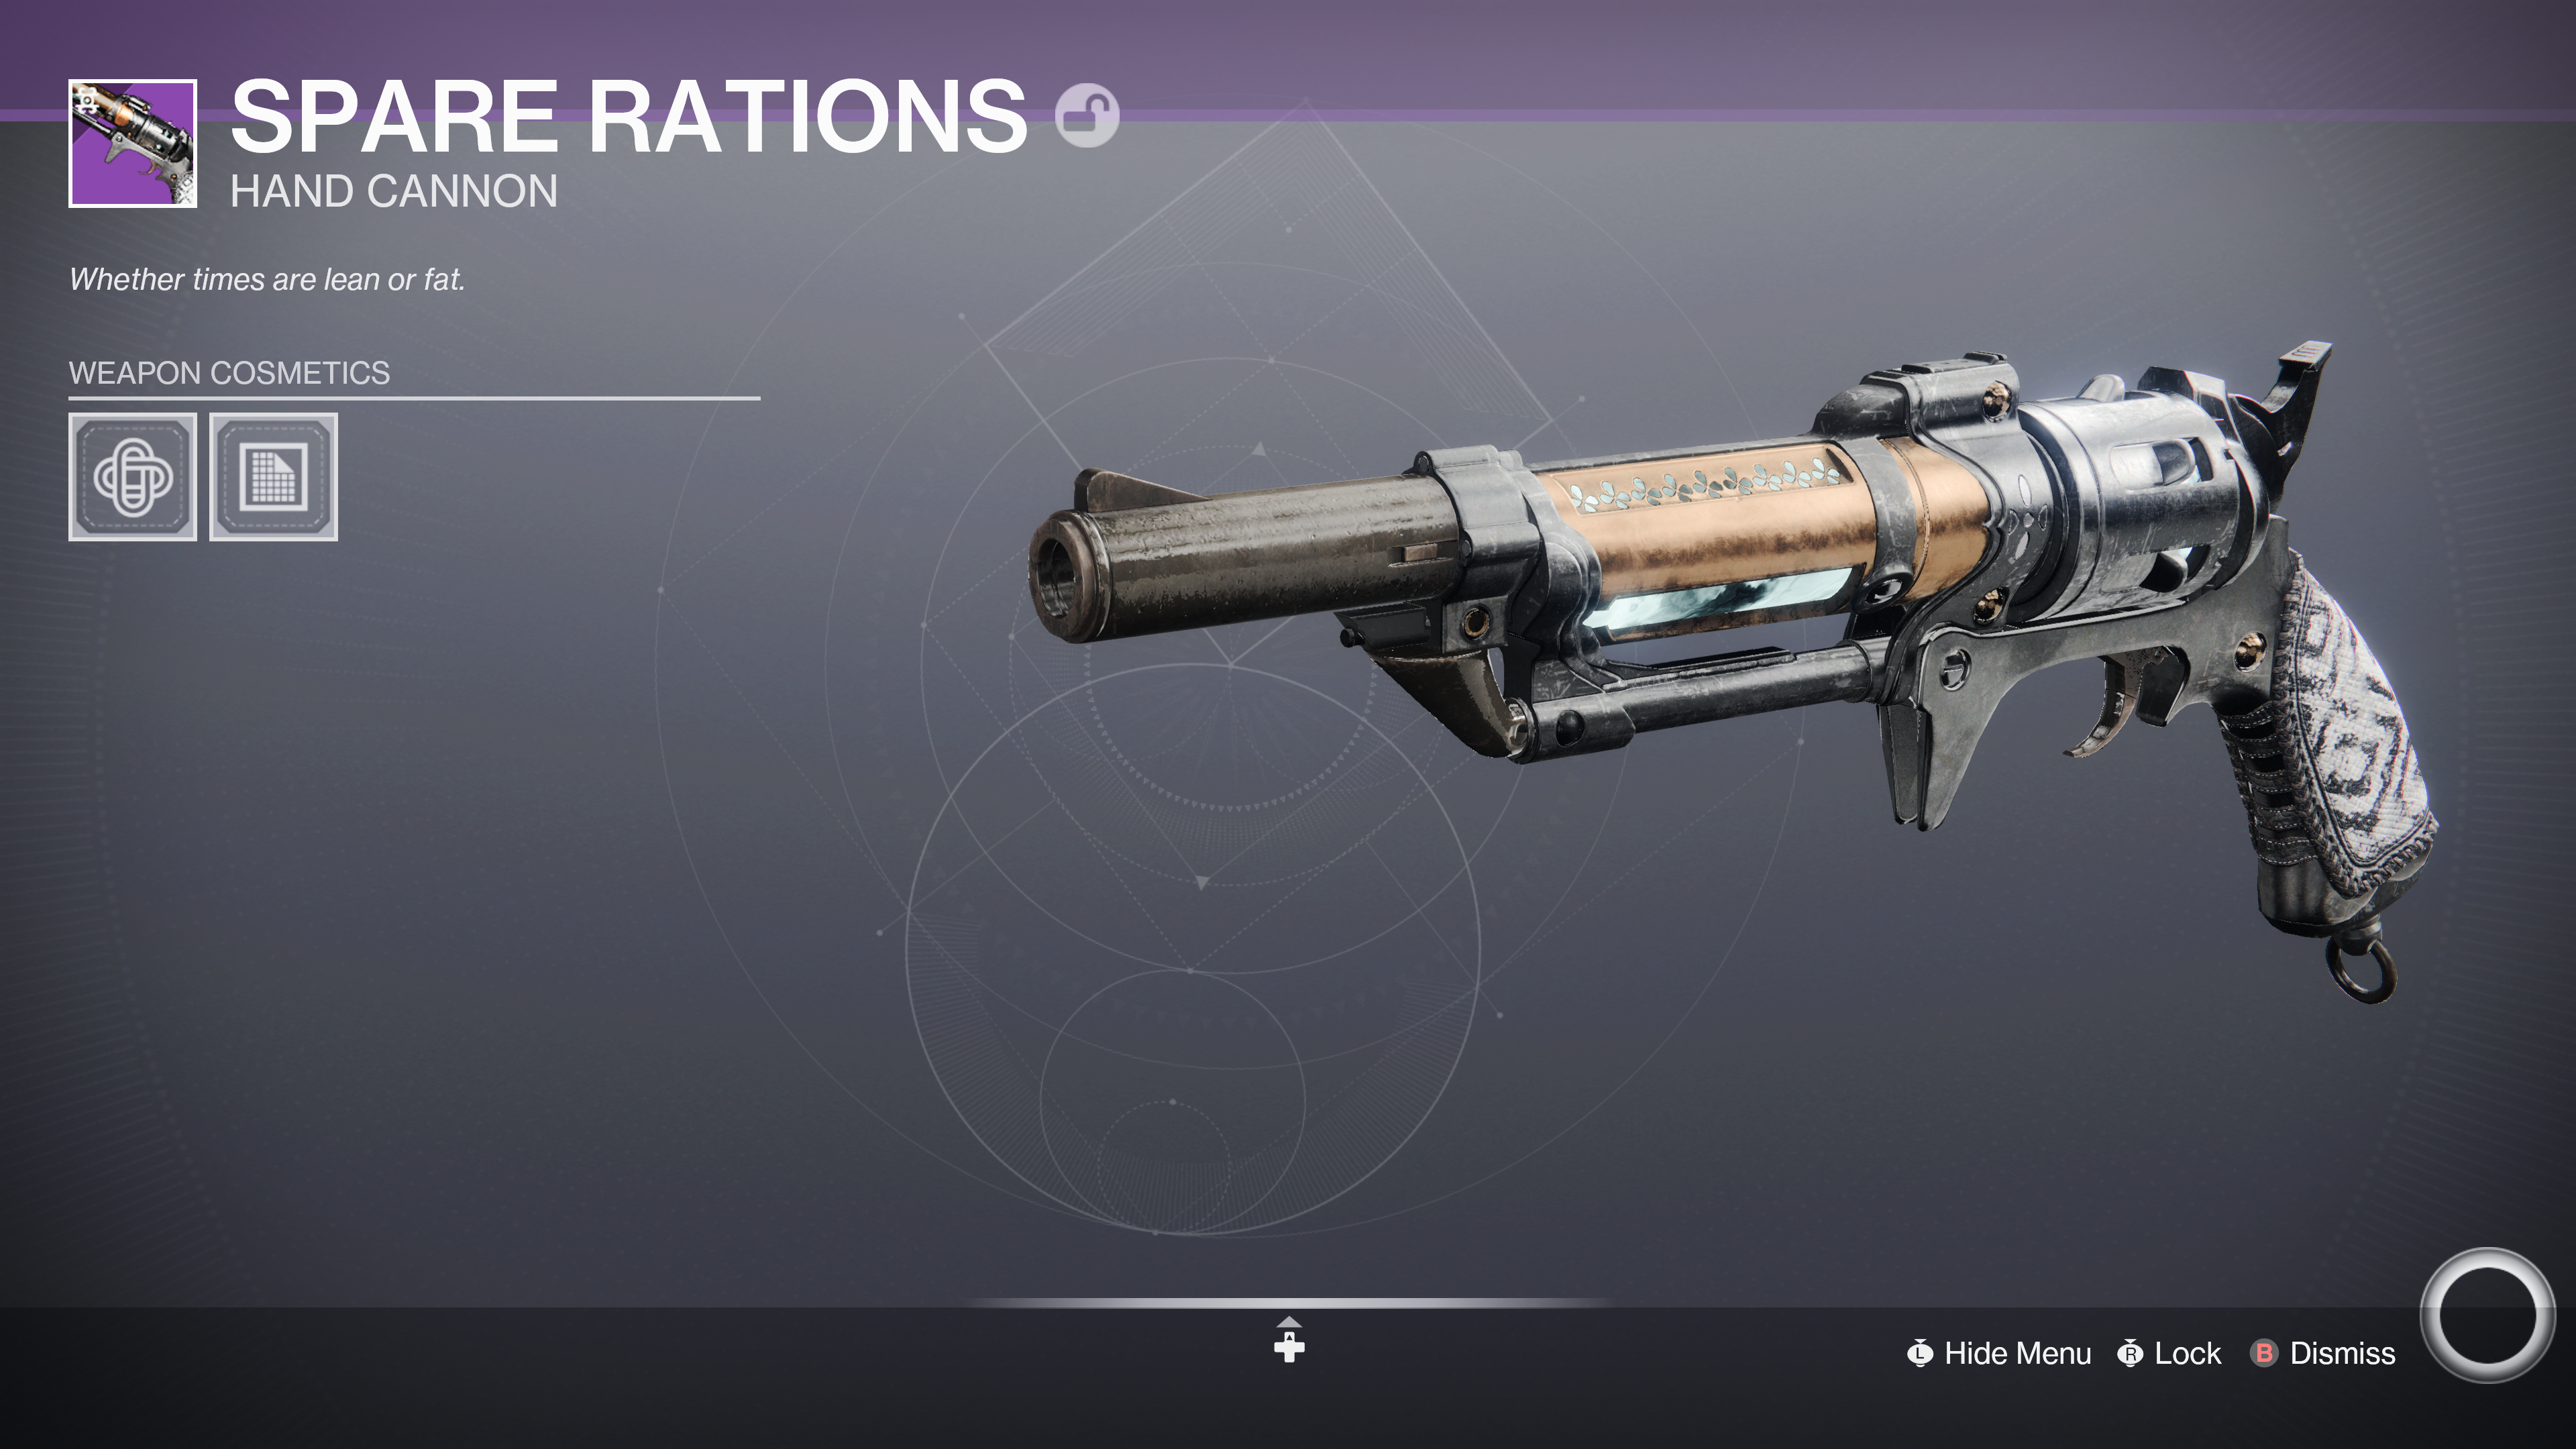 How to Get the Spare Rations Hand Cannon in Destiny 2 Season of the